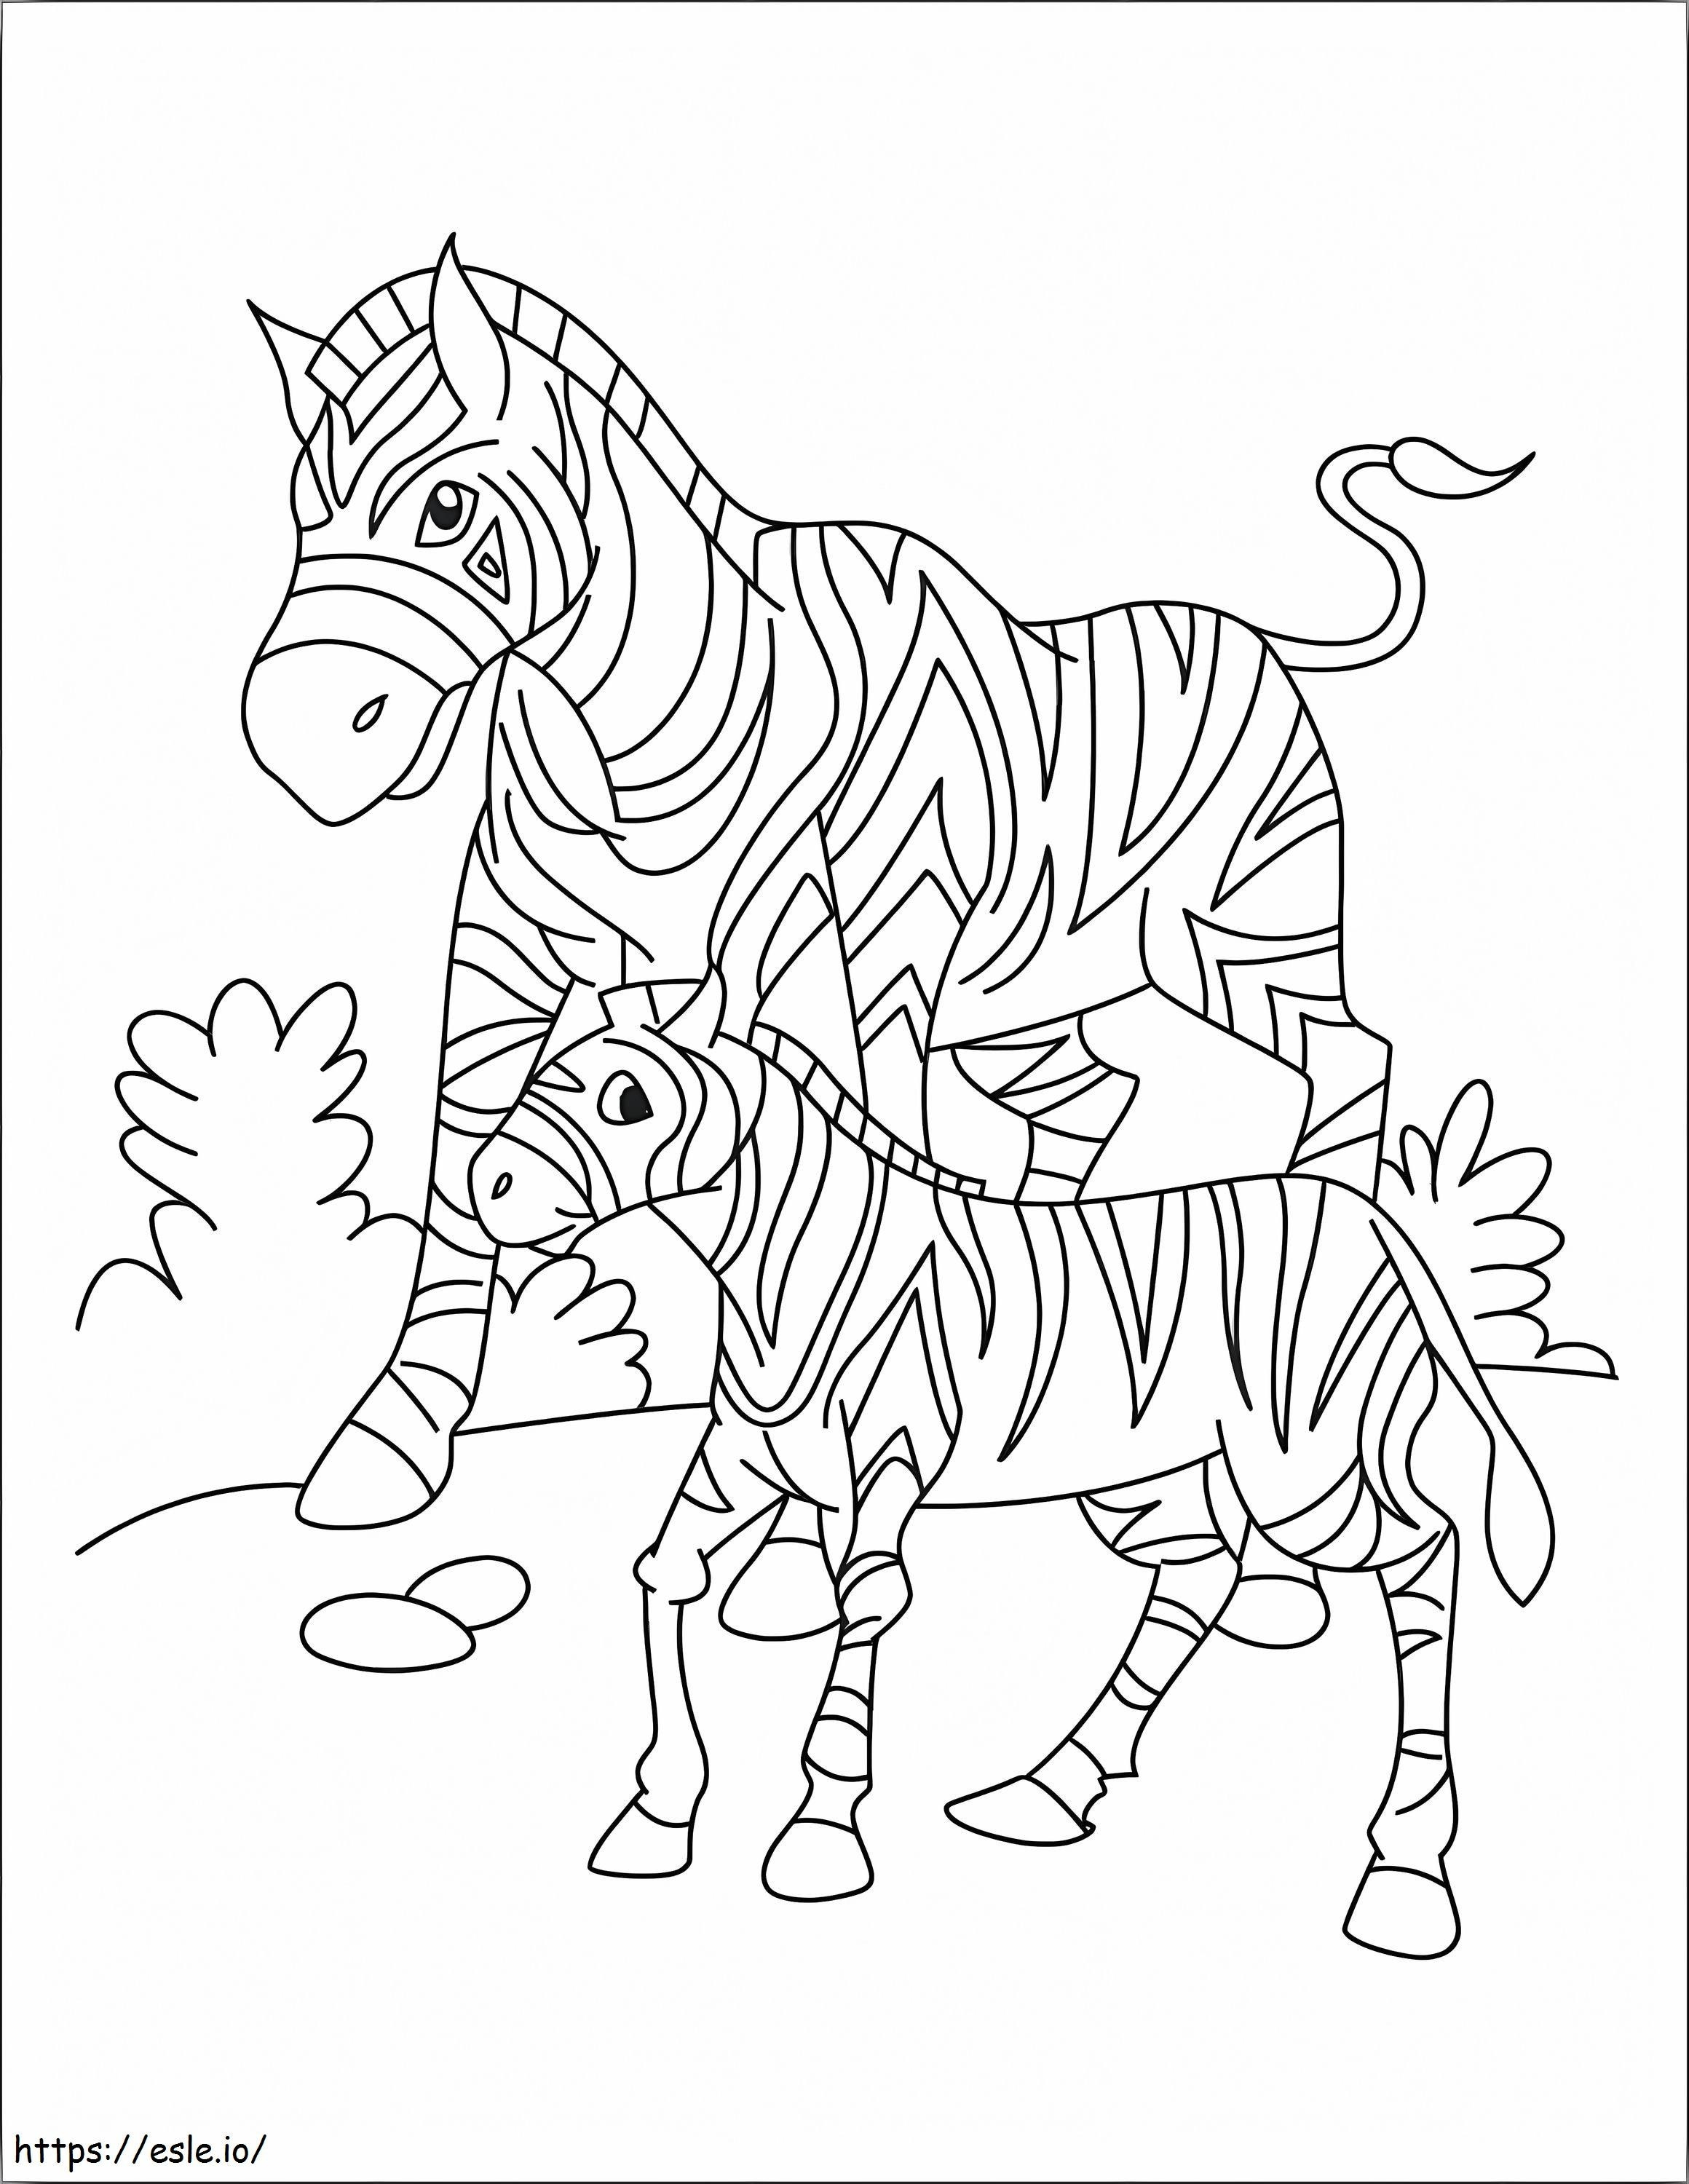 Mother Zebra And Baby Zebra coloring page